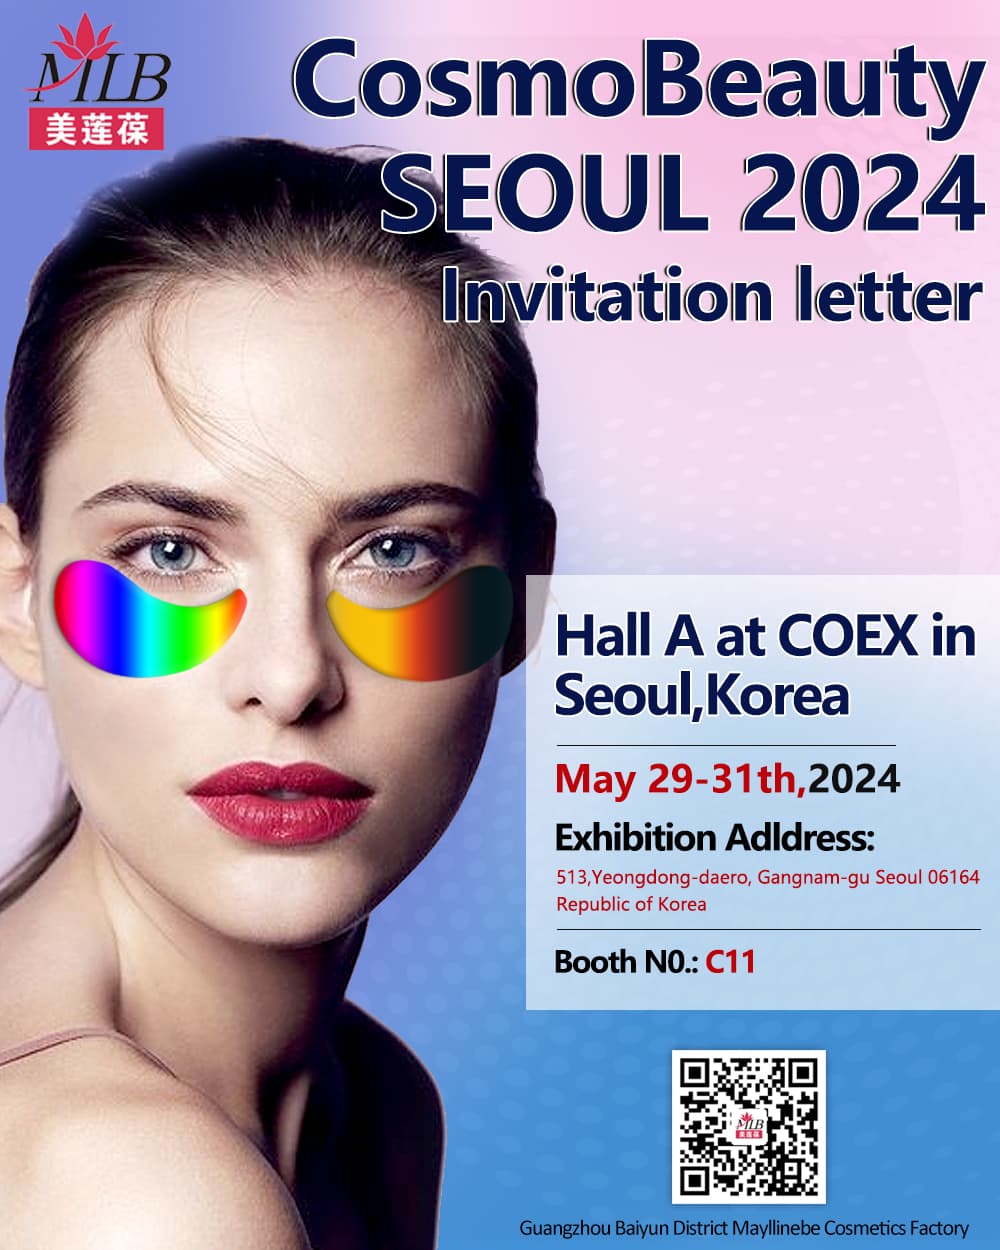 Mayllinebe attend the Cosmo Beauty SEOUL 2024